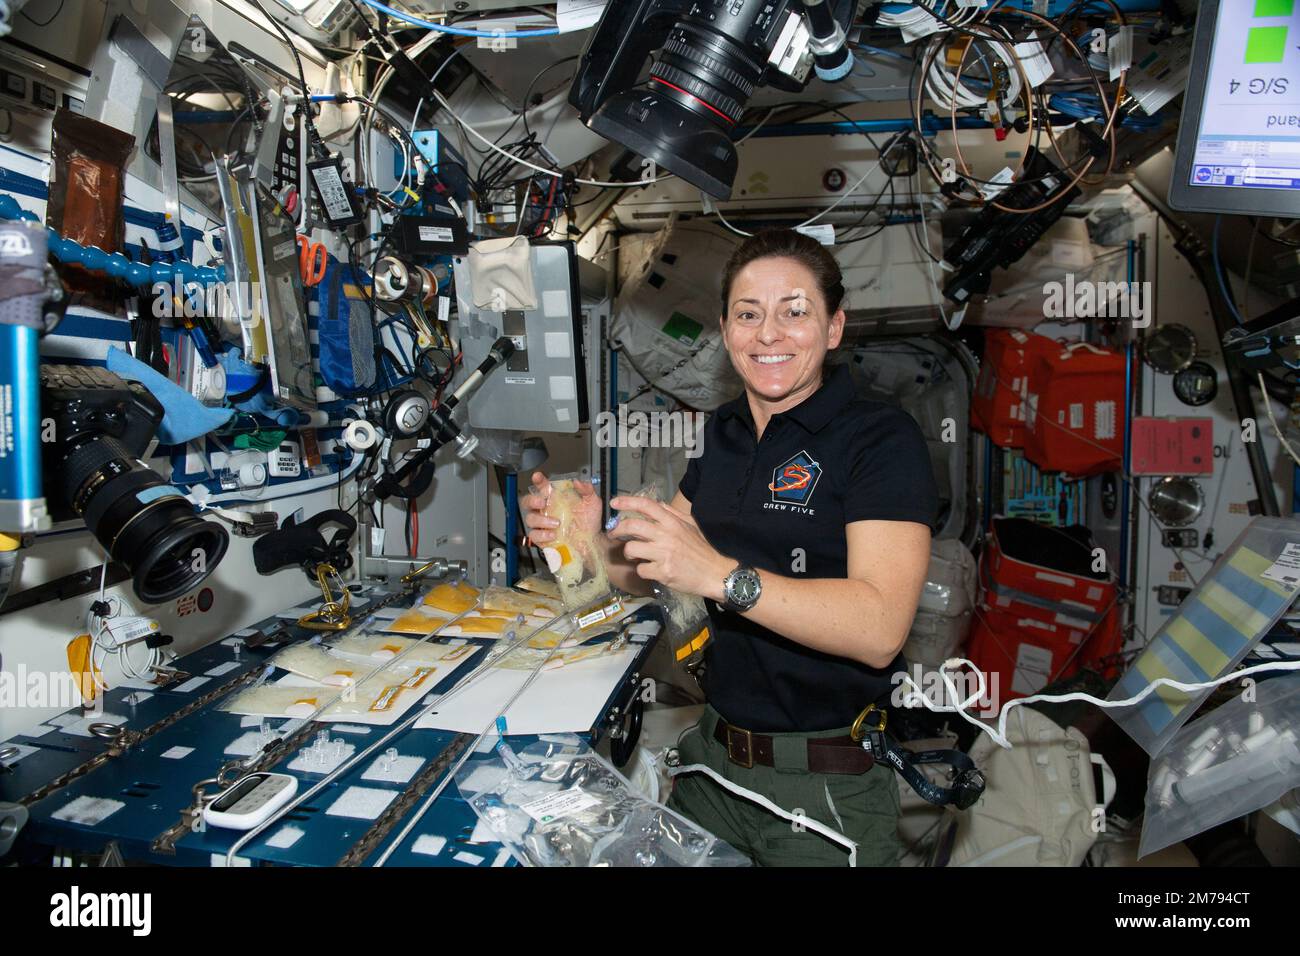 International Space Station, EARTH ORBIT. 03 January, 2023. NASA Expedition 68 NASA Flight Engineer, Nicole Mann, works in the Harmony module onboard the International Space Station, January 1, 2023 in Earth Orbit. Mann is working on the BioNutrients-2 investigation using genetically engineered microbes to provide nutrients, and potentially other compounds including pharmaceuticals, on demand in space. Stock Photo